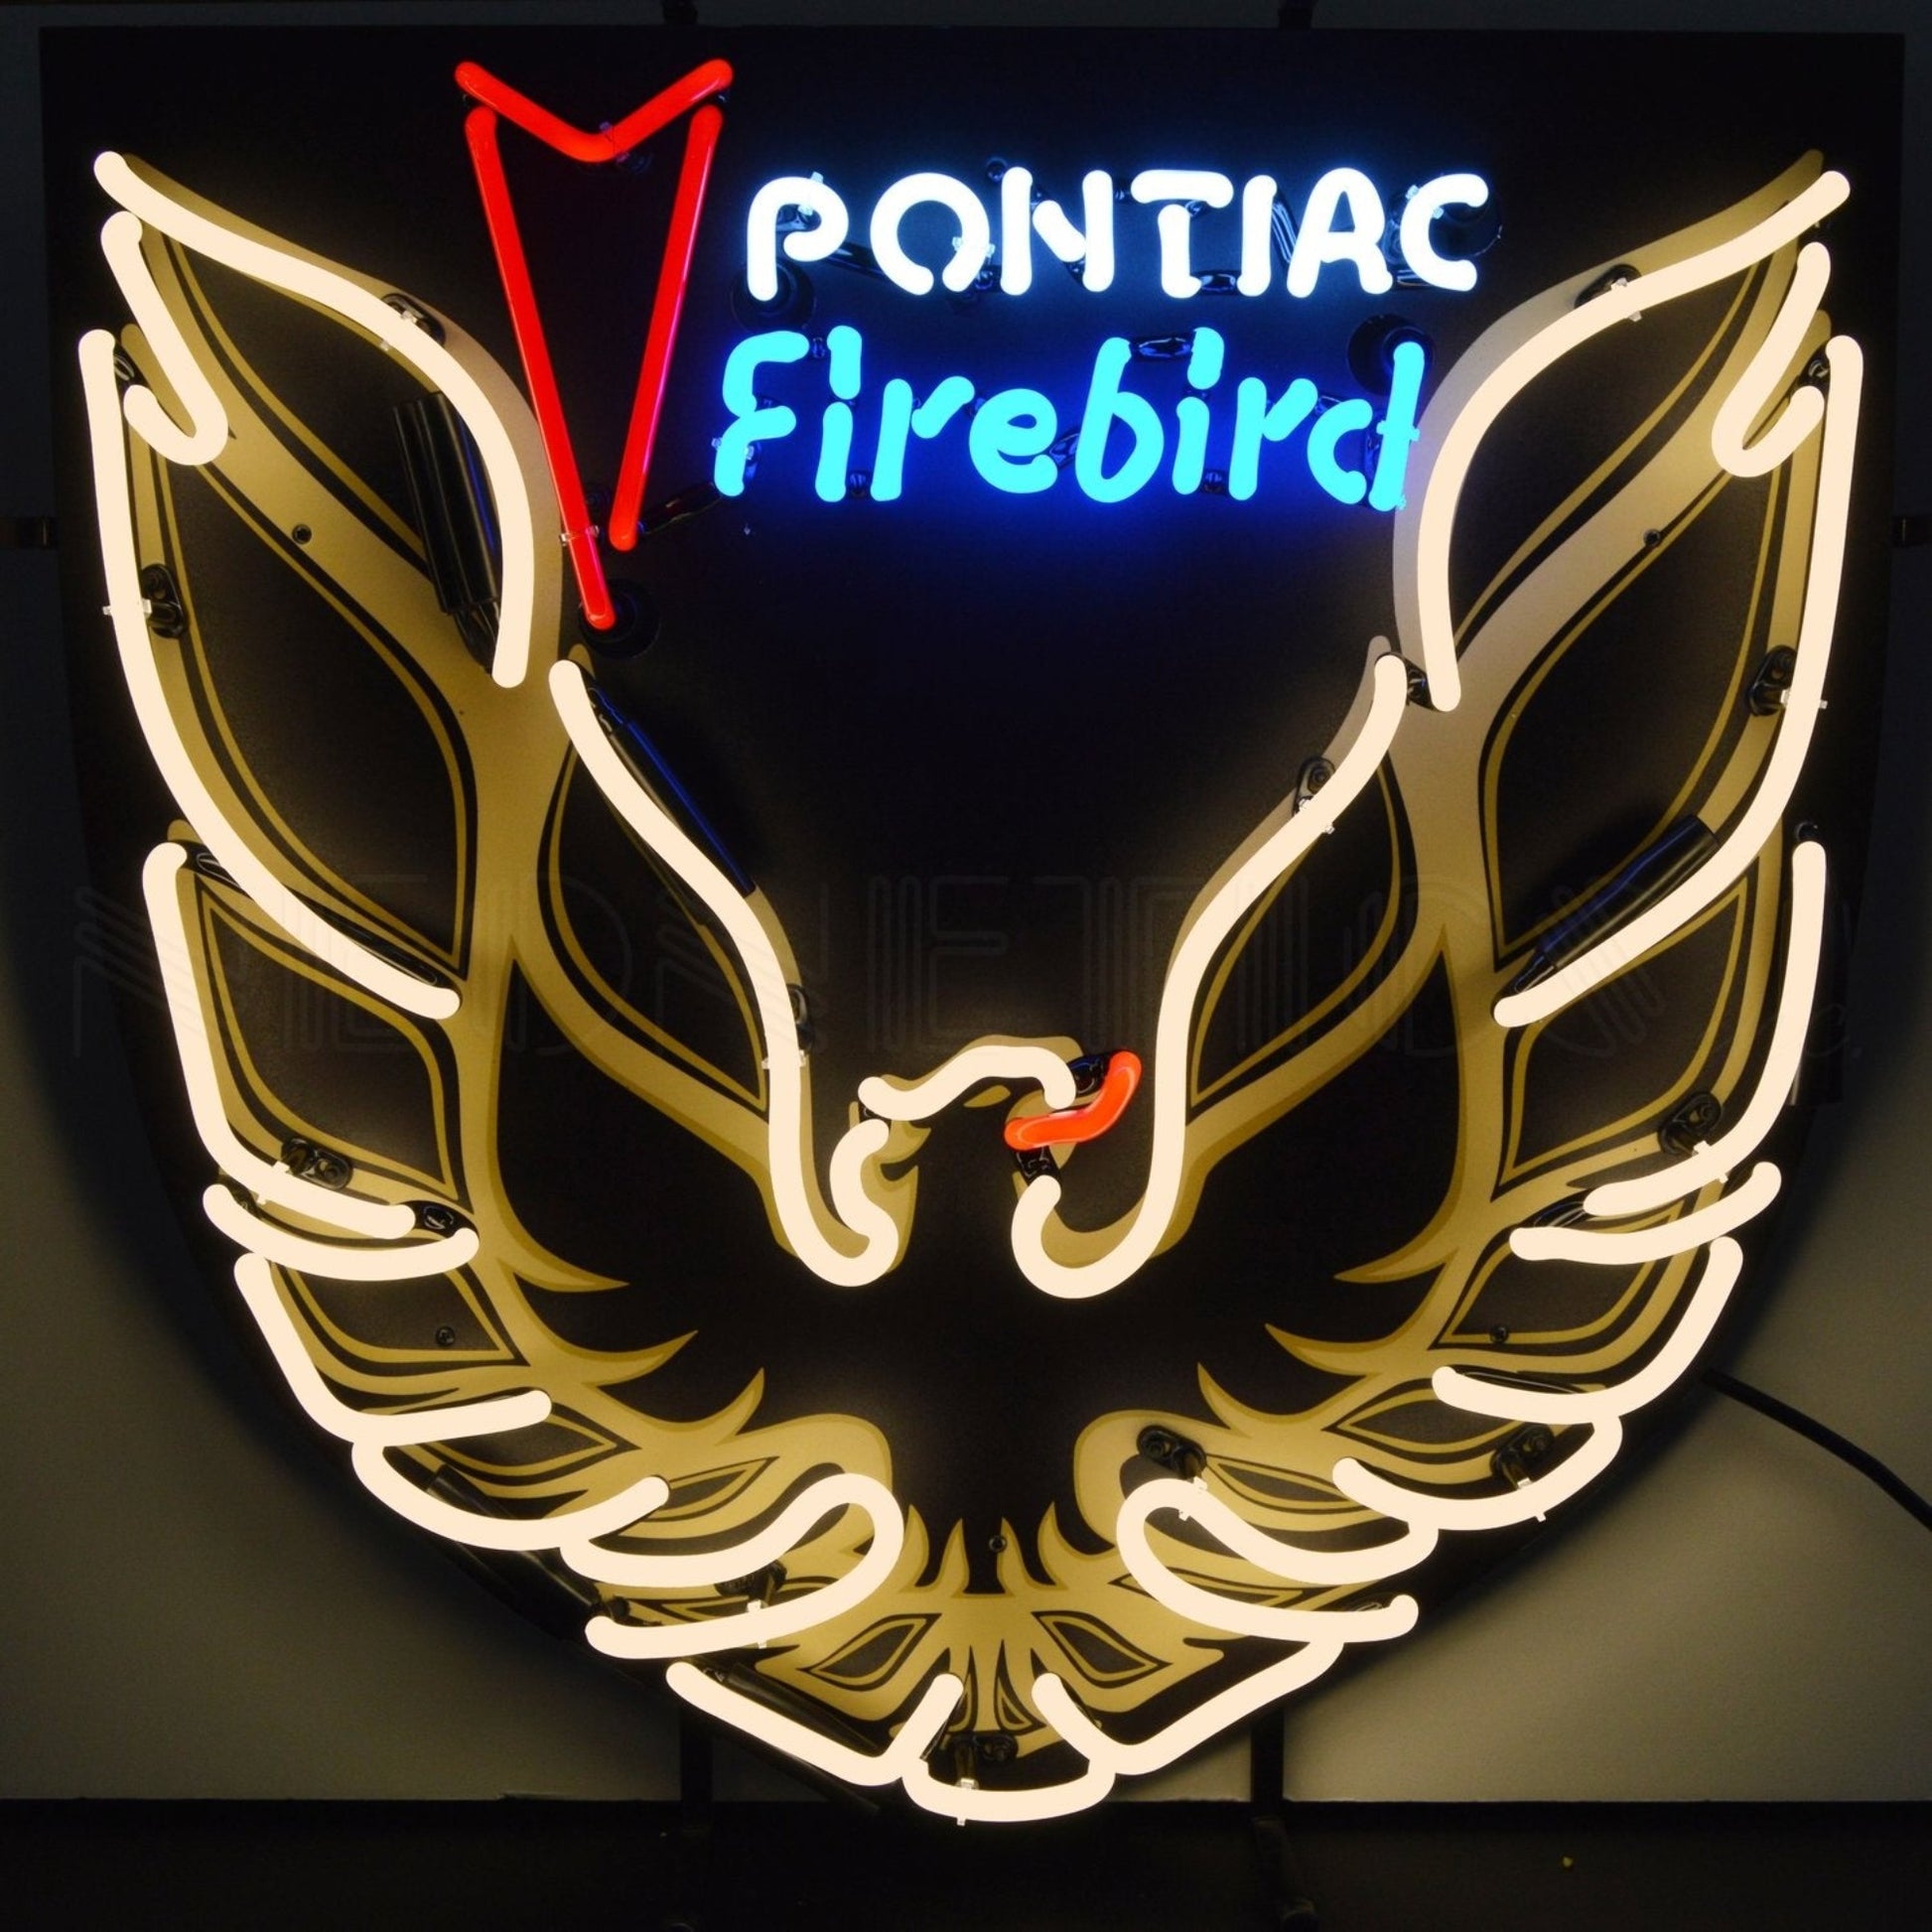 Pontiac Firebird logo neon sign in white, blue, and red